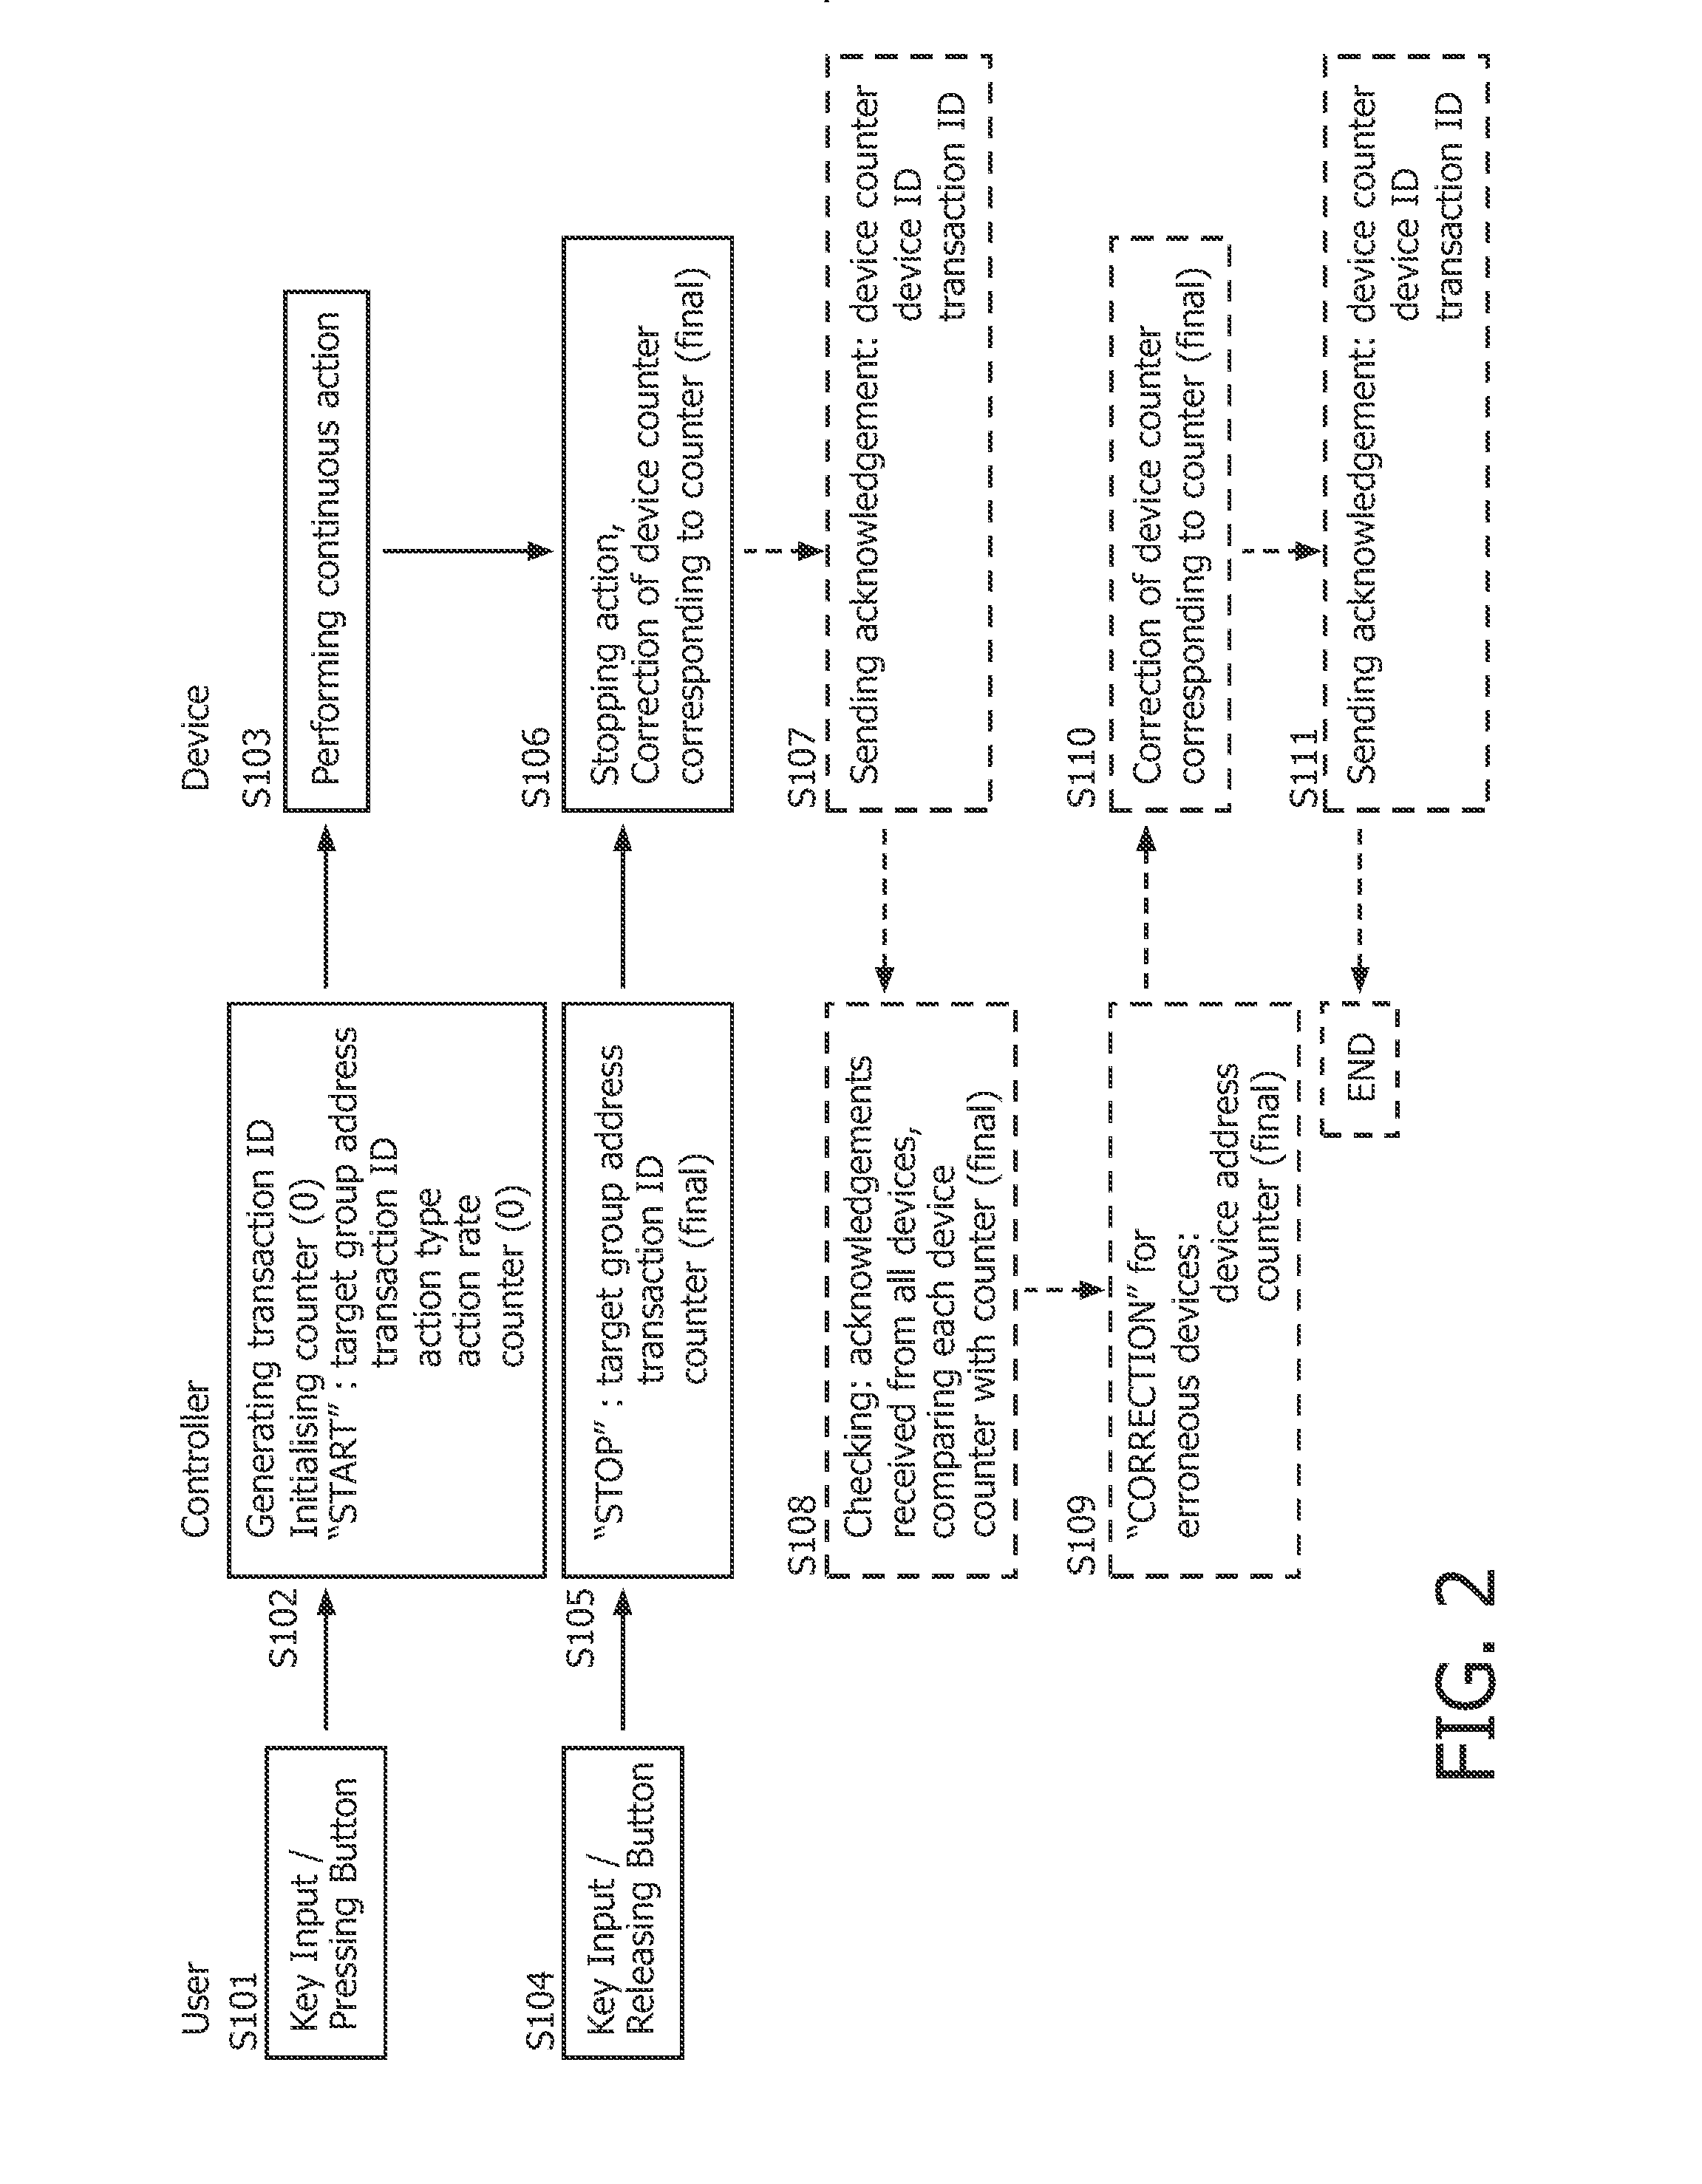 Home automation system and method for controlling the same